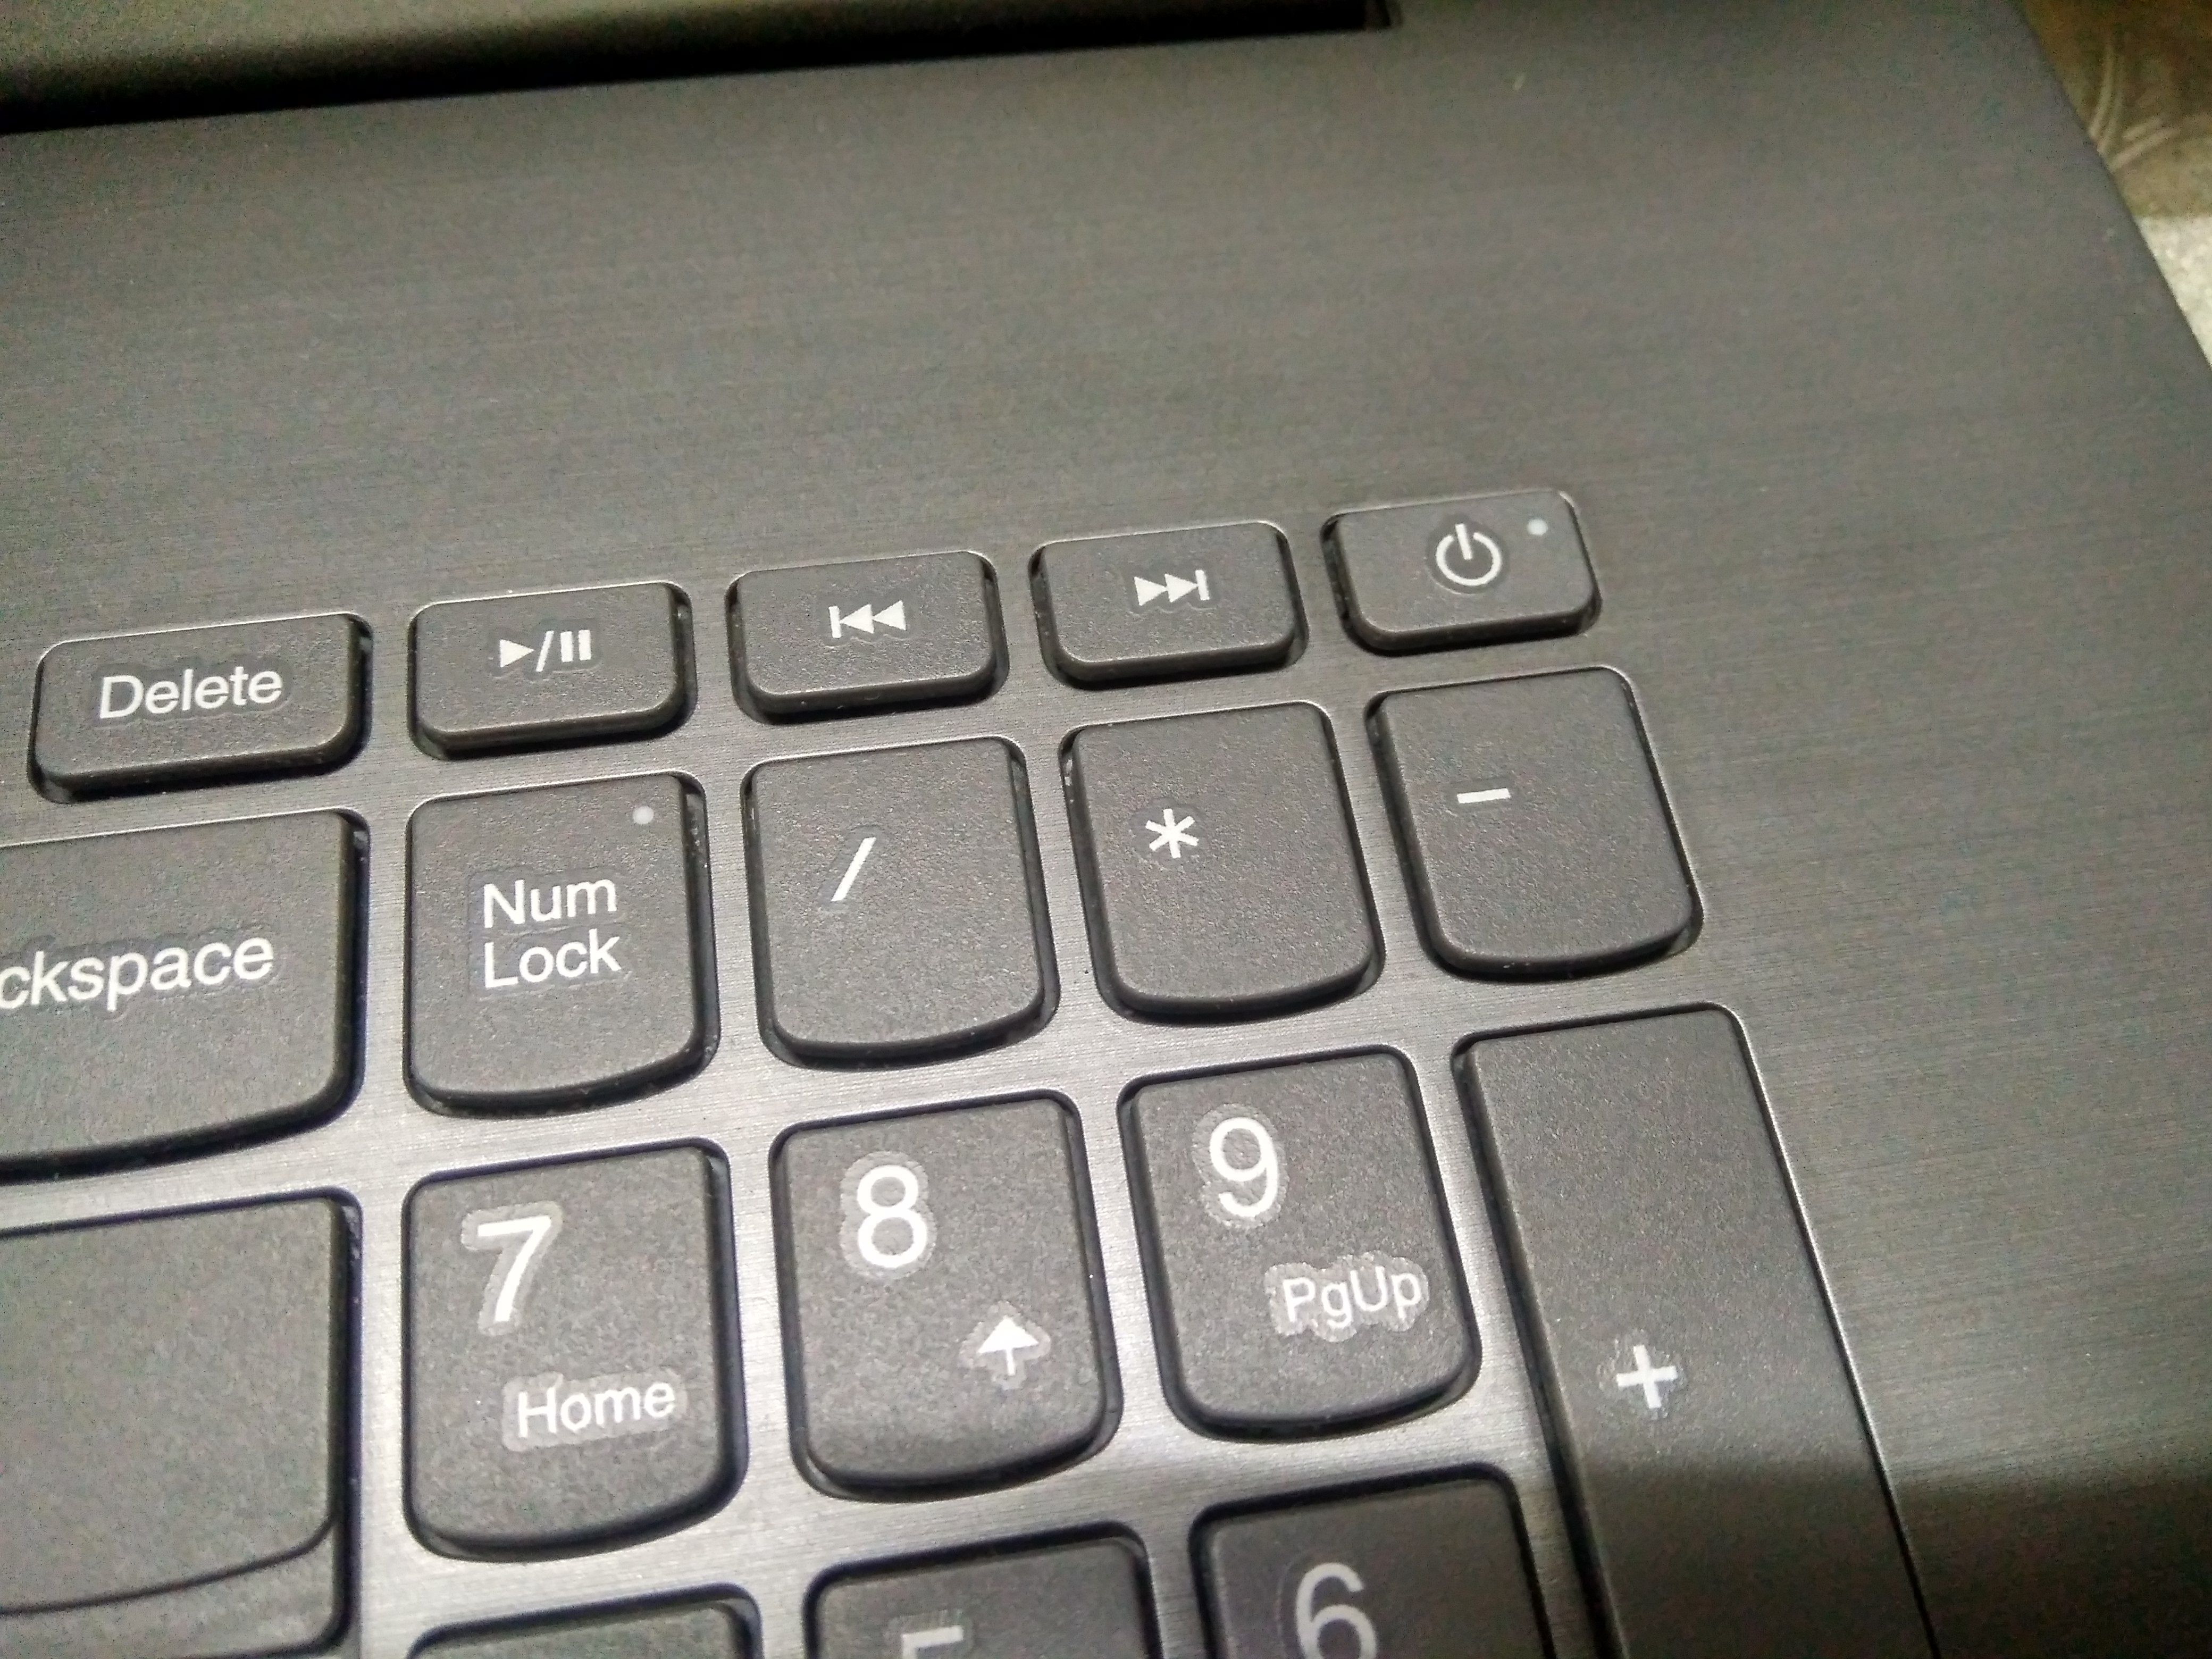 Lenovo ideapad gaming 3 power button blinking, power on but screen